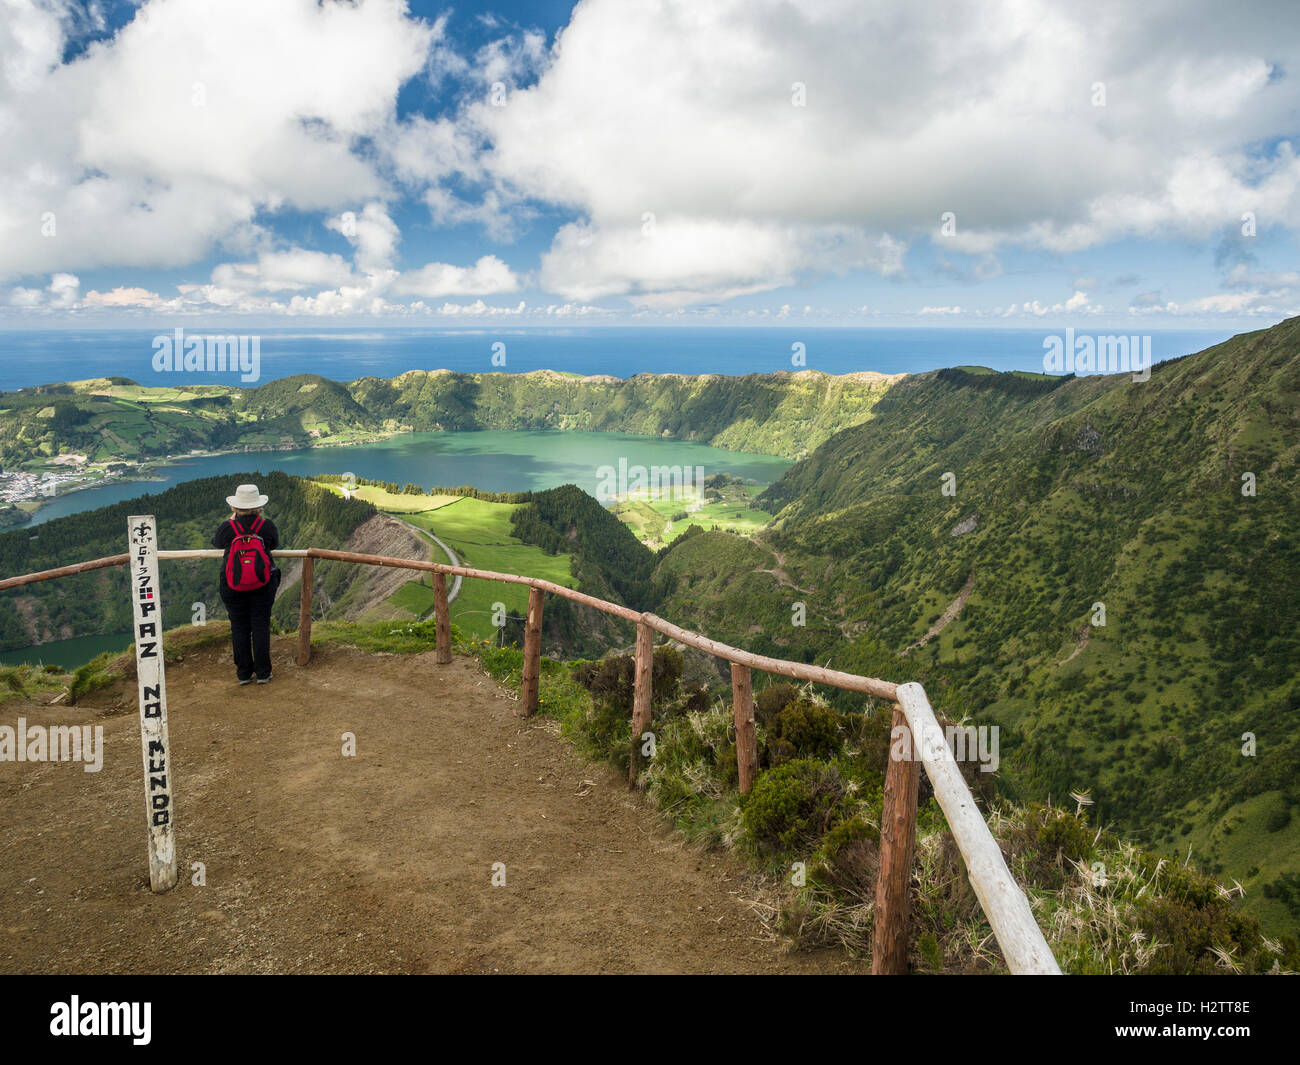 Photographing Sete Cidades from Above. A woman at the end of the path pauses to photograph the awe inspiring landscape below. Stock Photo